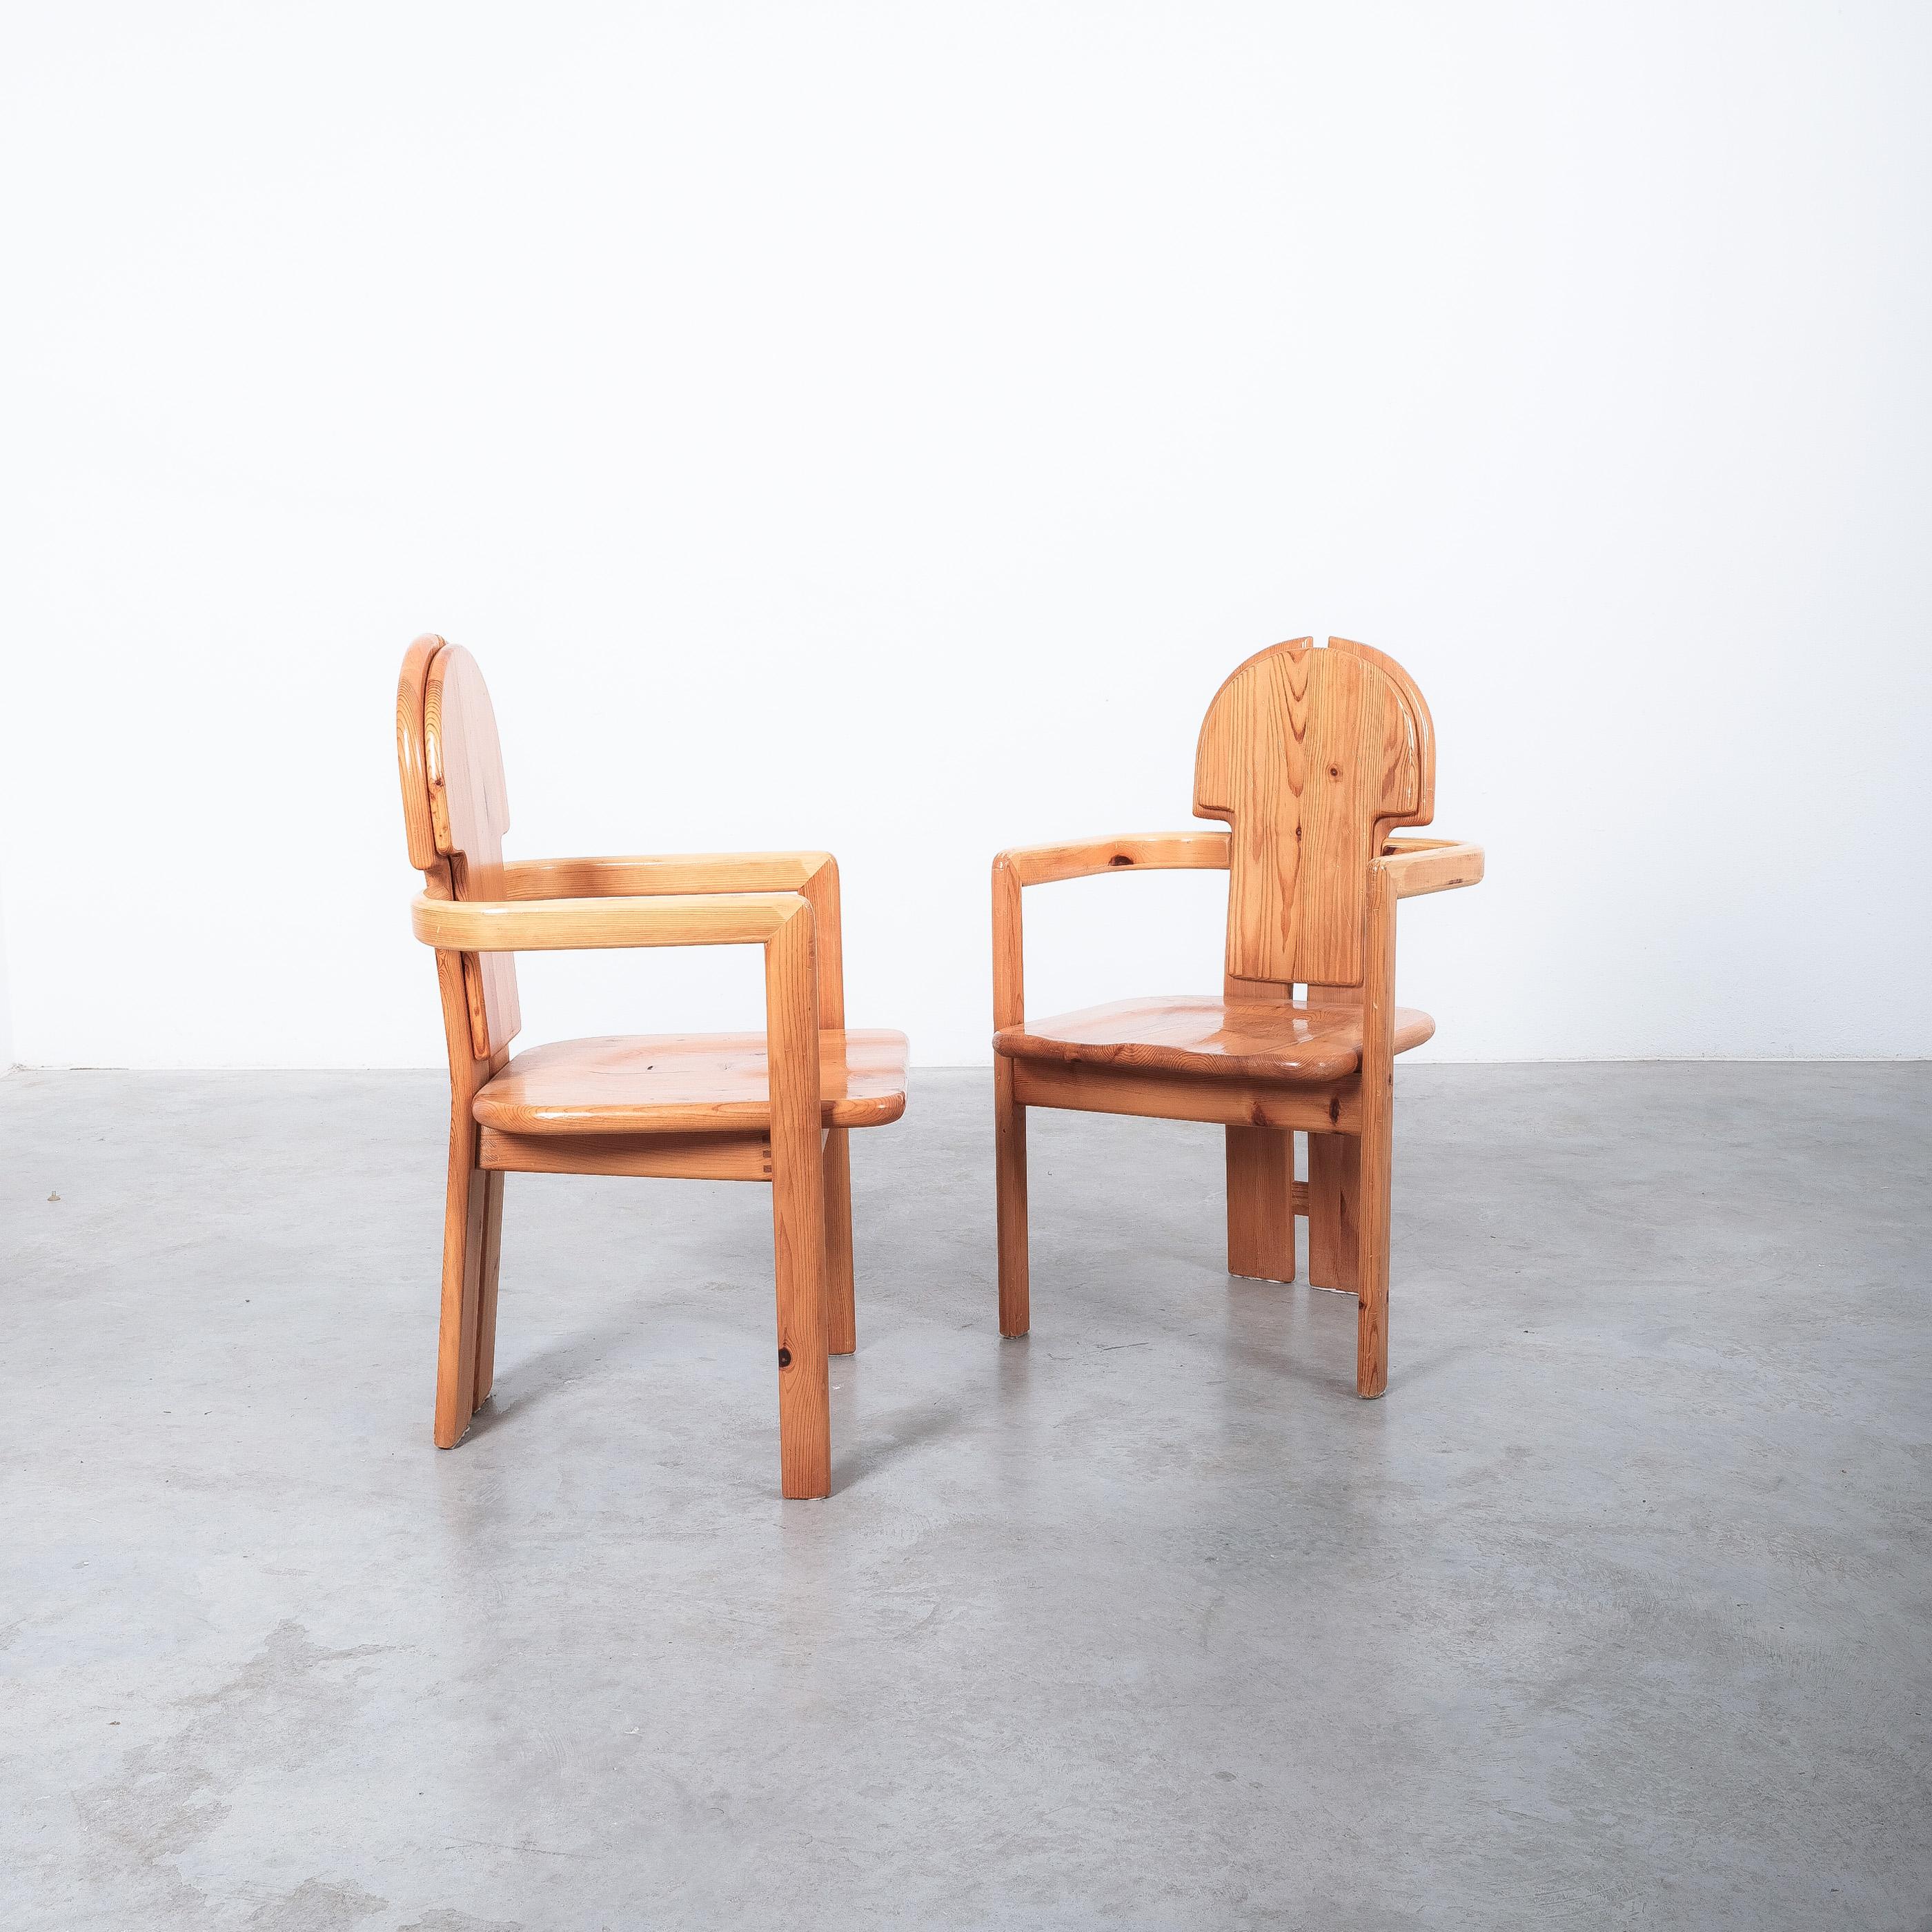 Rainer Daumiller Solid Pine Wood Dining Chairs '6' Danish Design, 1970 For Sale 15